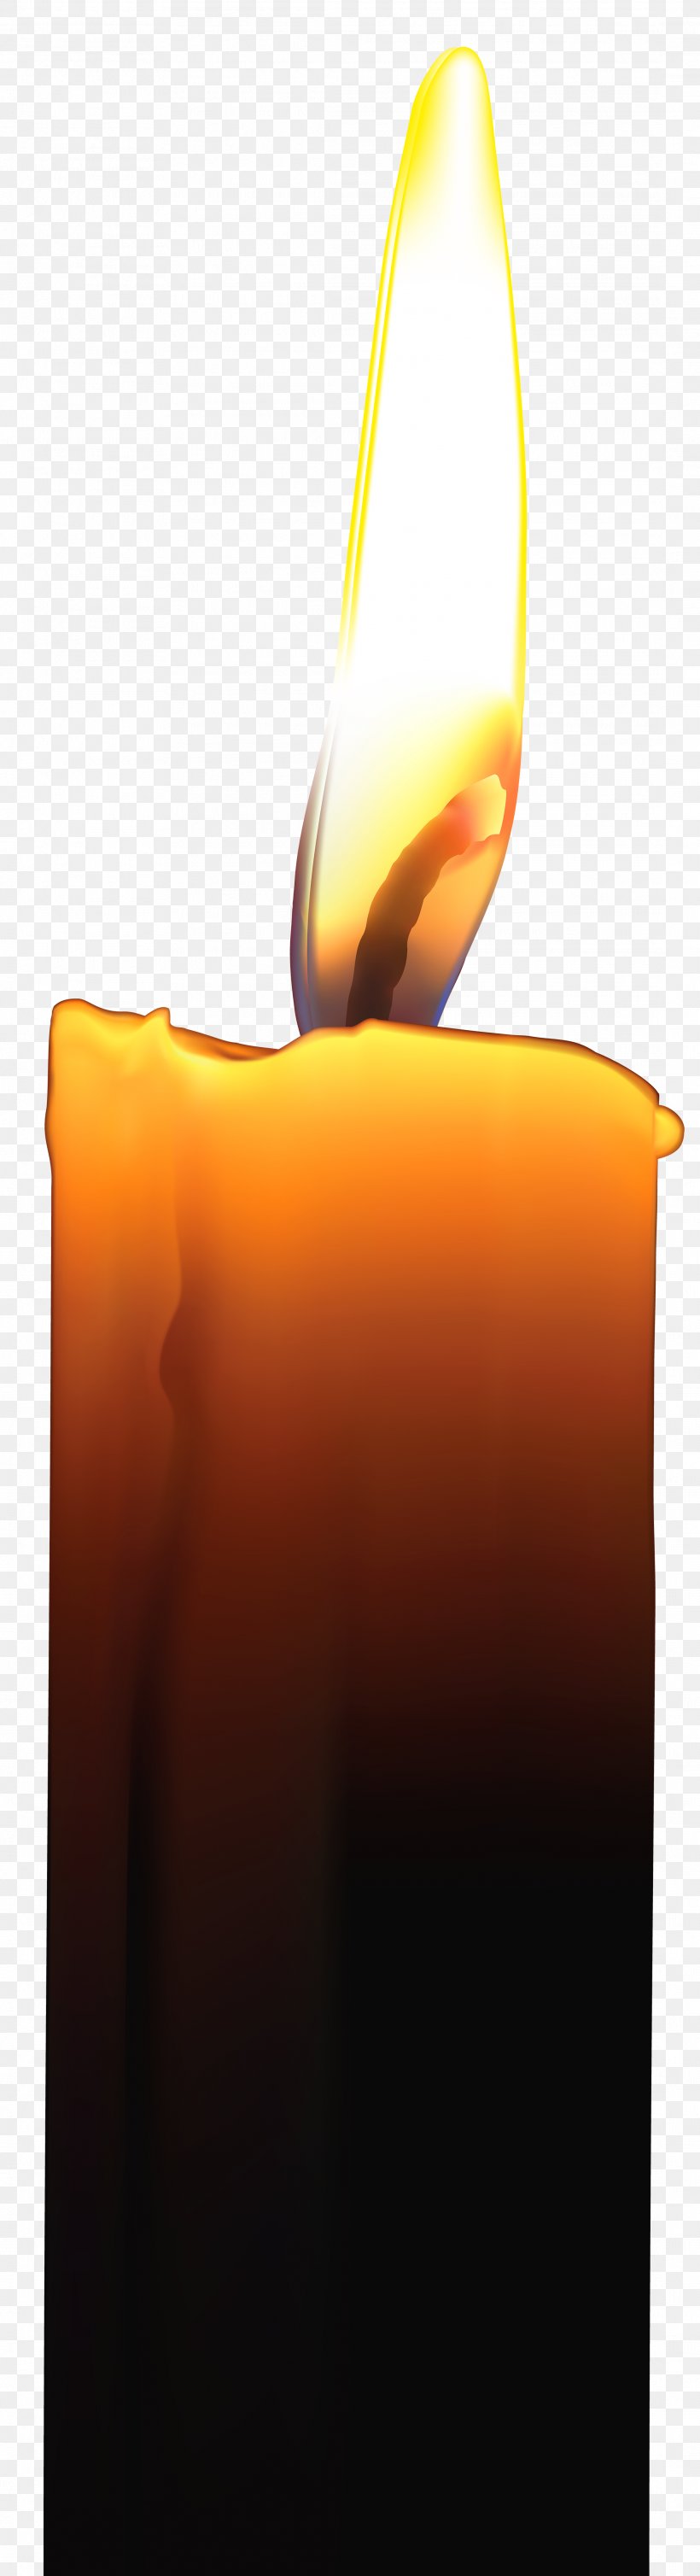 Candle Clip Art, PNG, 2175x8000px, Candle, Halloween, Orange Download Free